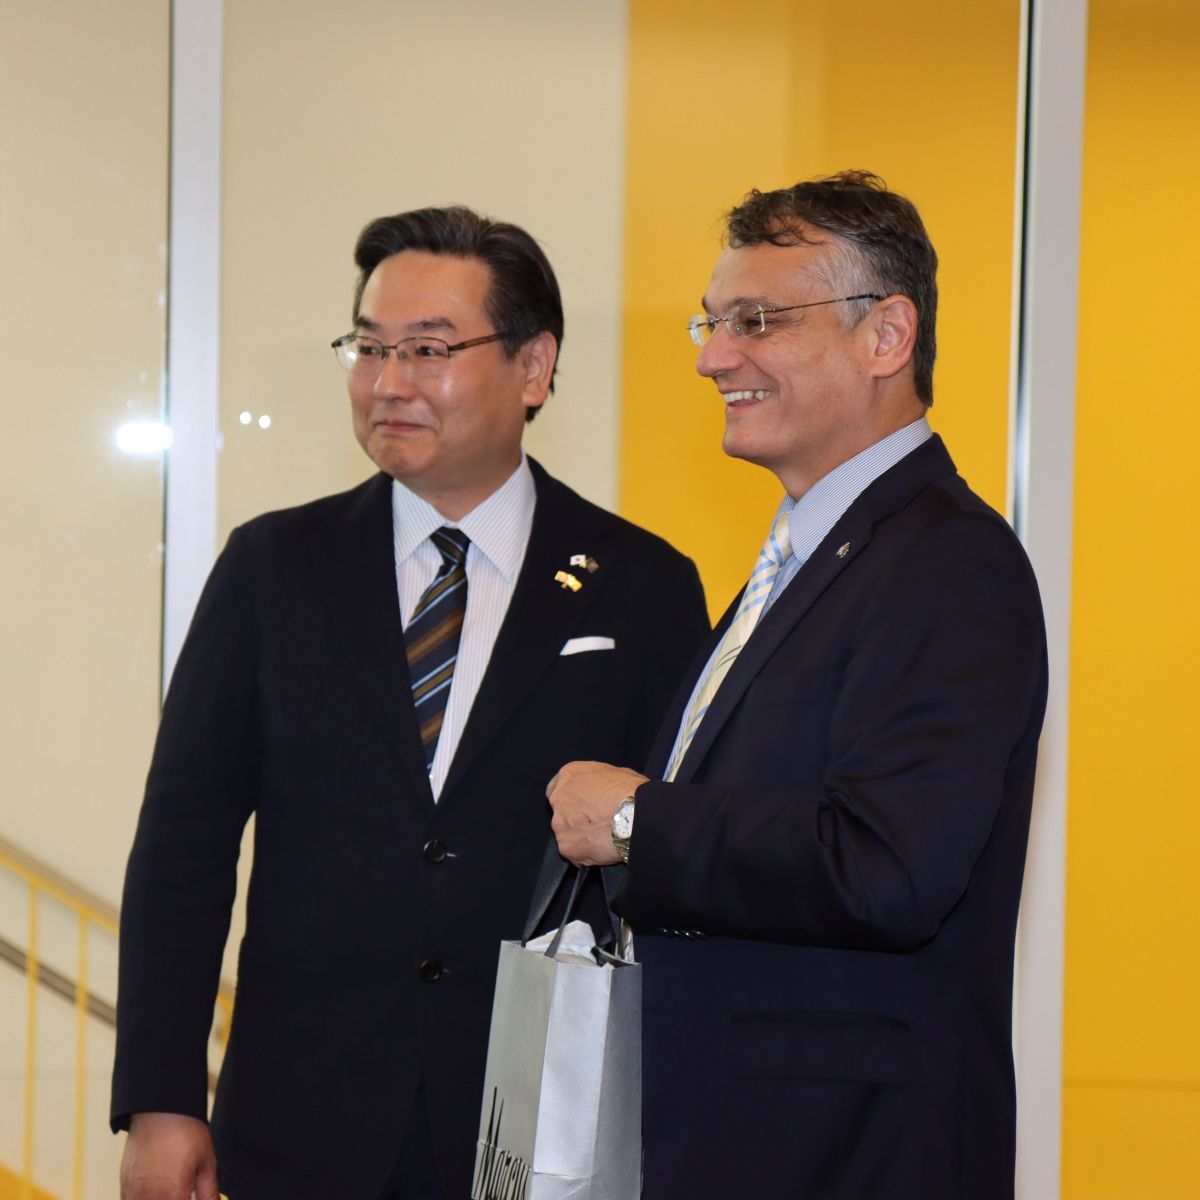 Consul-General Tajima exchanges a gift with Daniel Castro, dean of Purdue Polytechnic, during a tour of Dudley and Lambertus Halls. (Purdue University photo/John O'Malley)